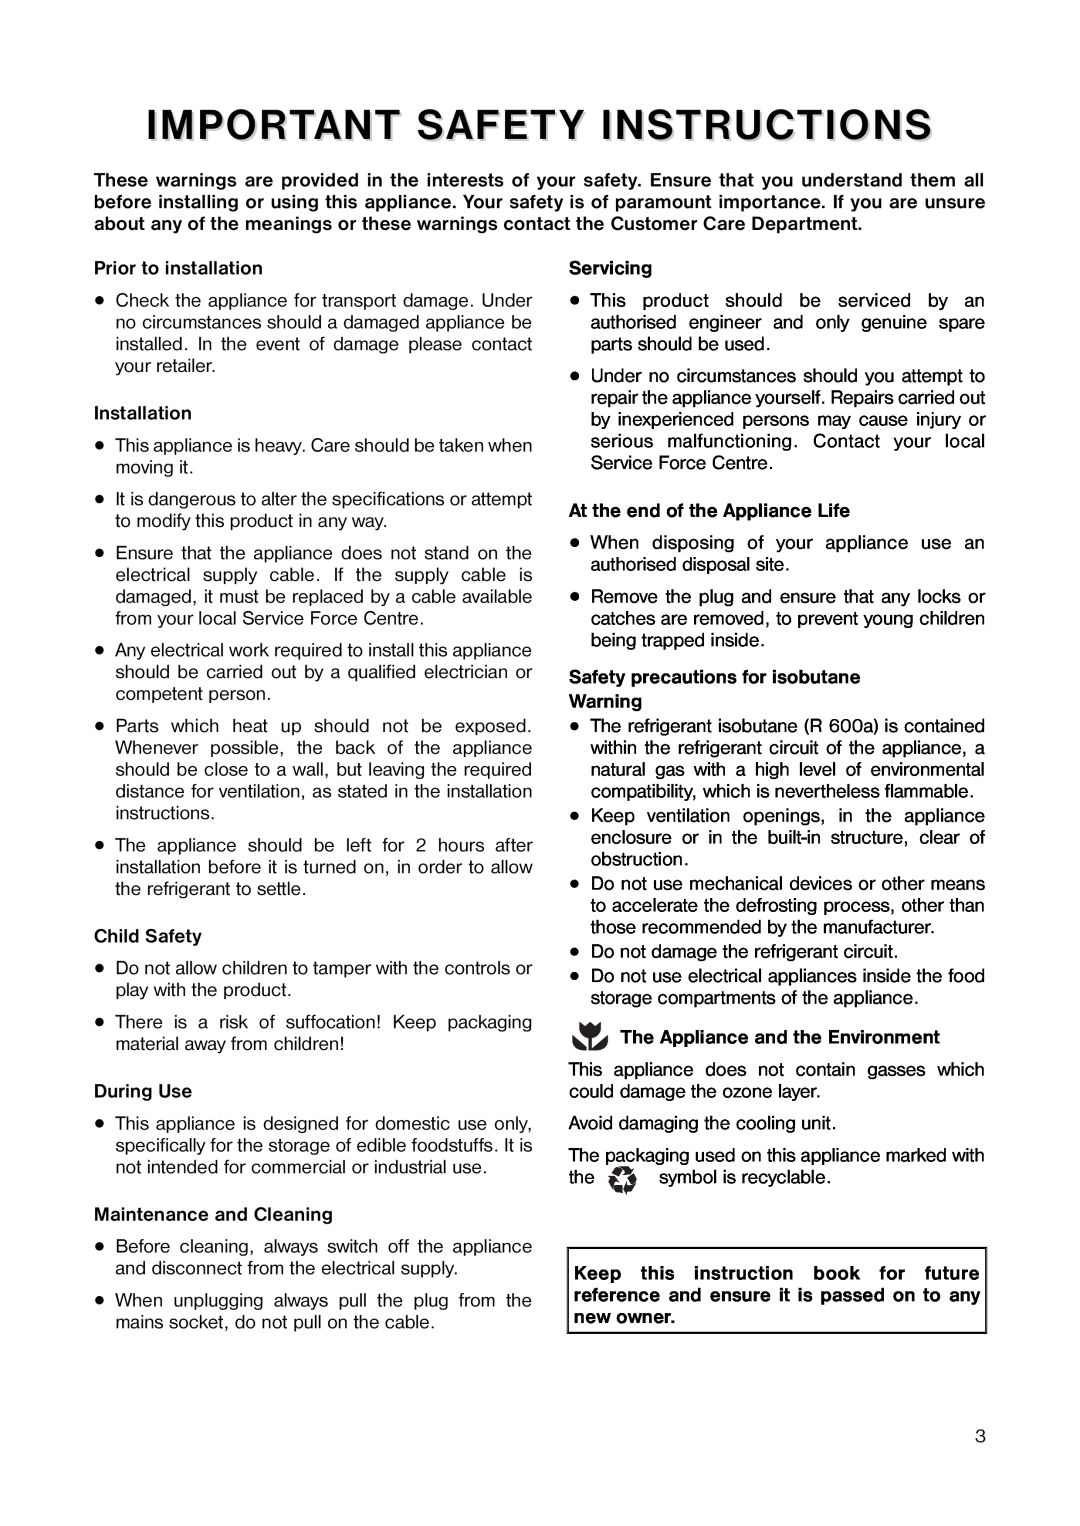 Zanussi ZCL 56 manual Important Safety Instructions, Prior to installation, Installation, Child Safety, During Use 